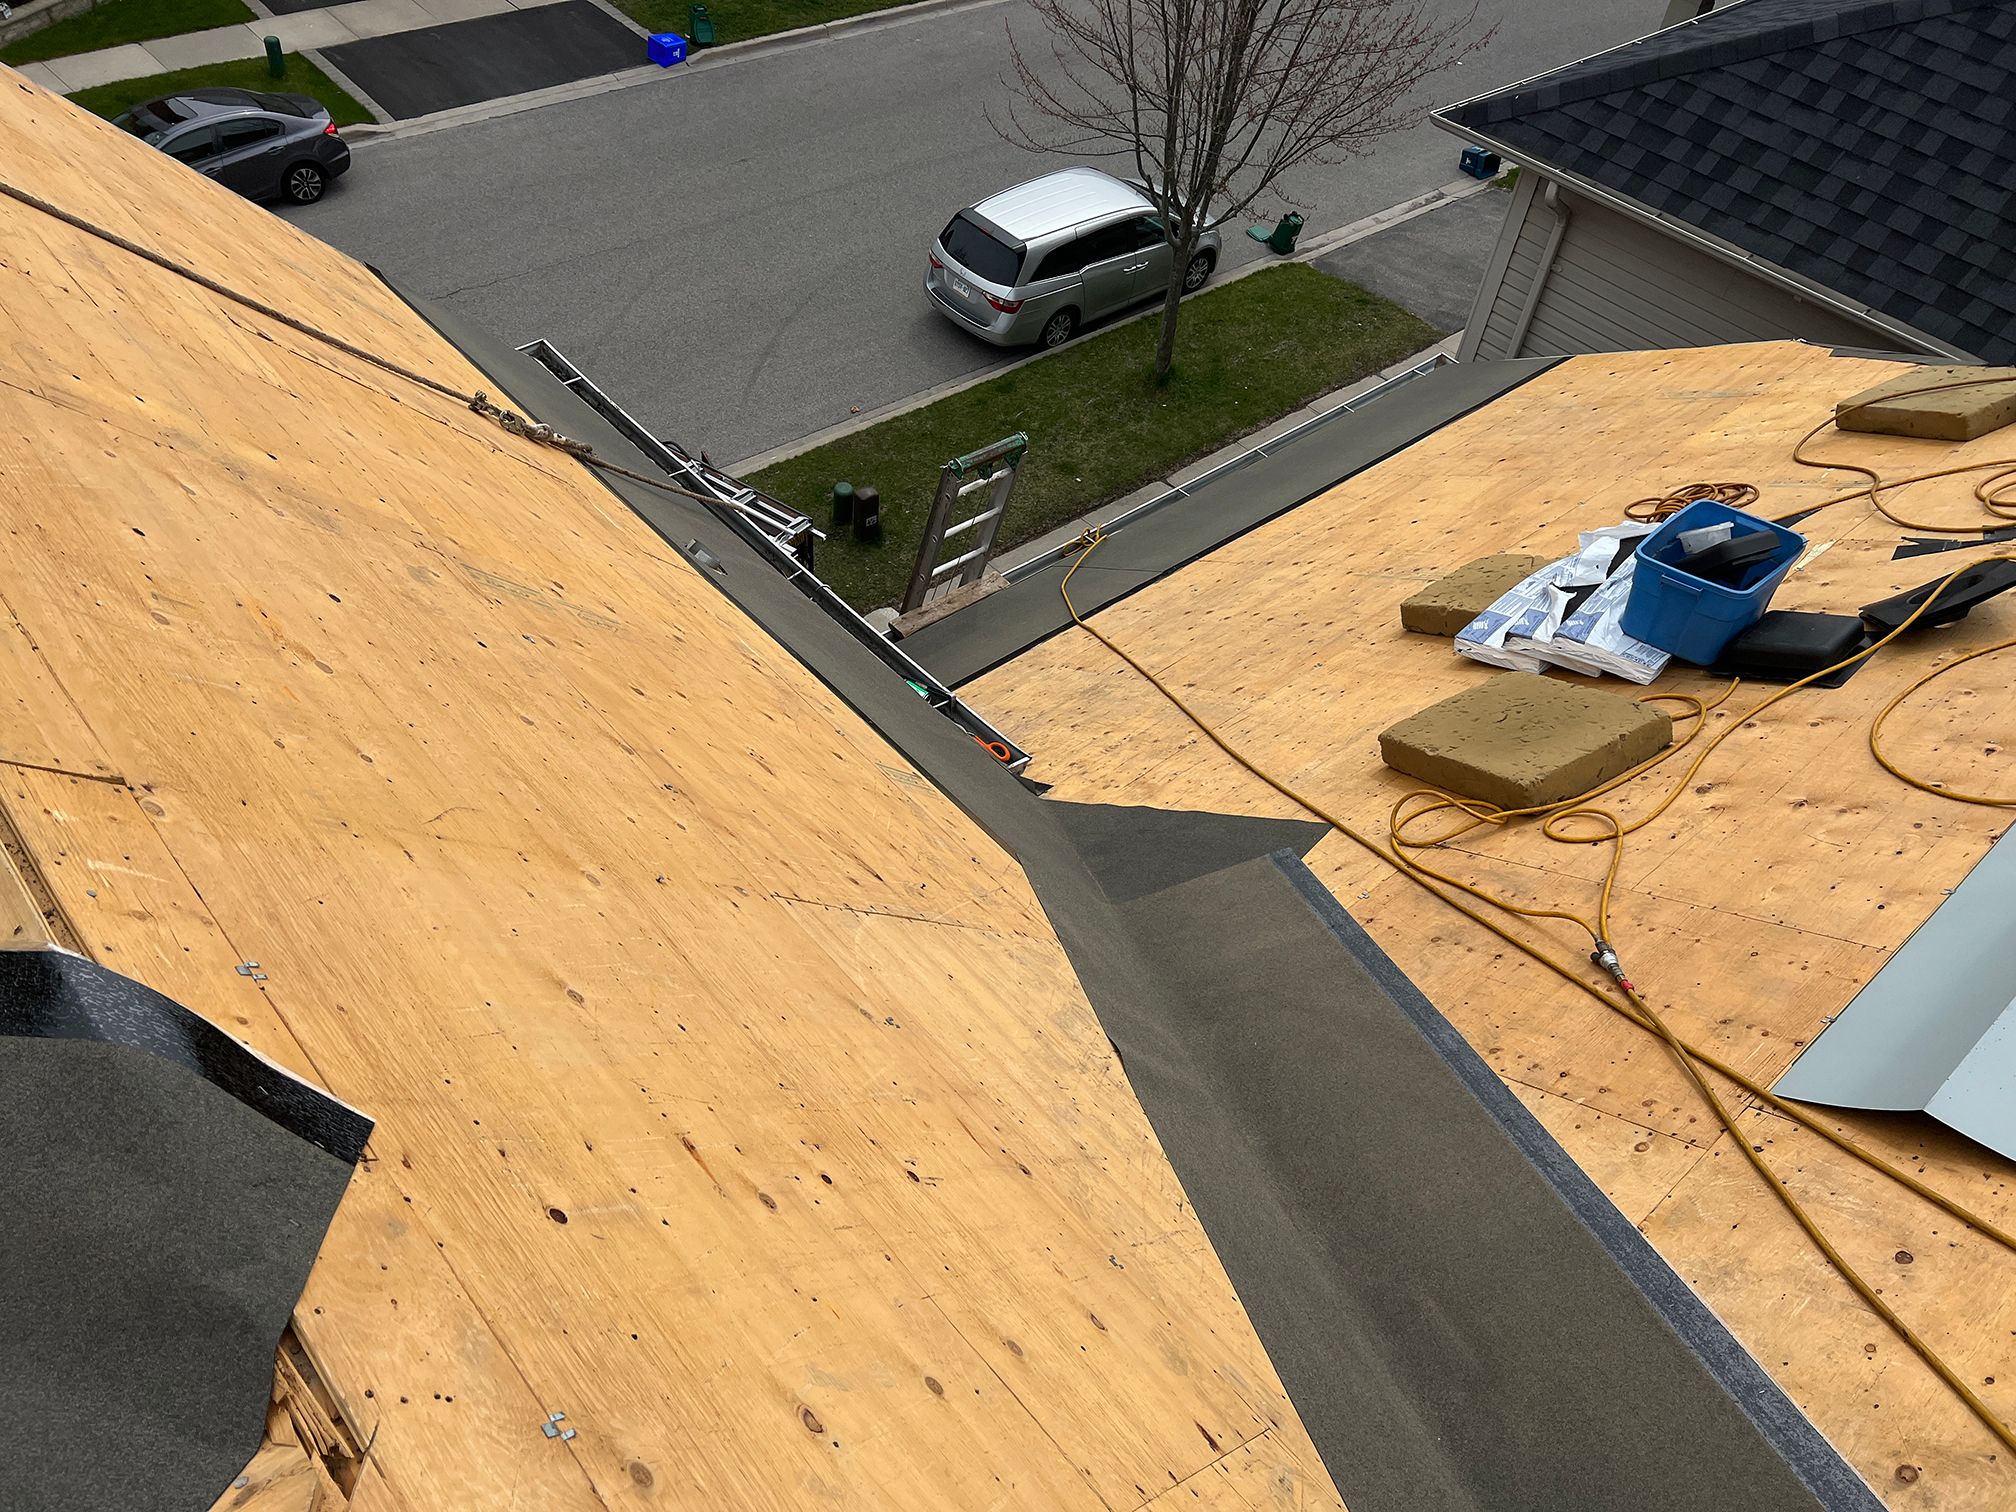 Ajax roof replacement